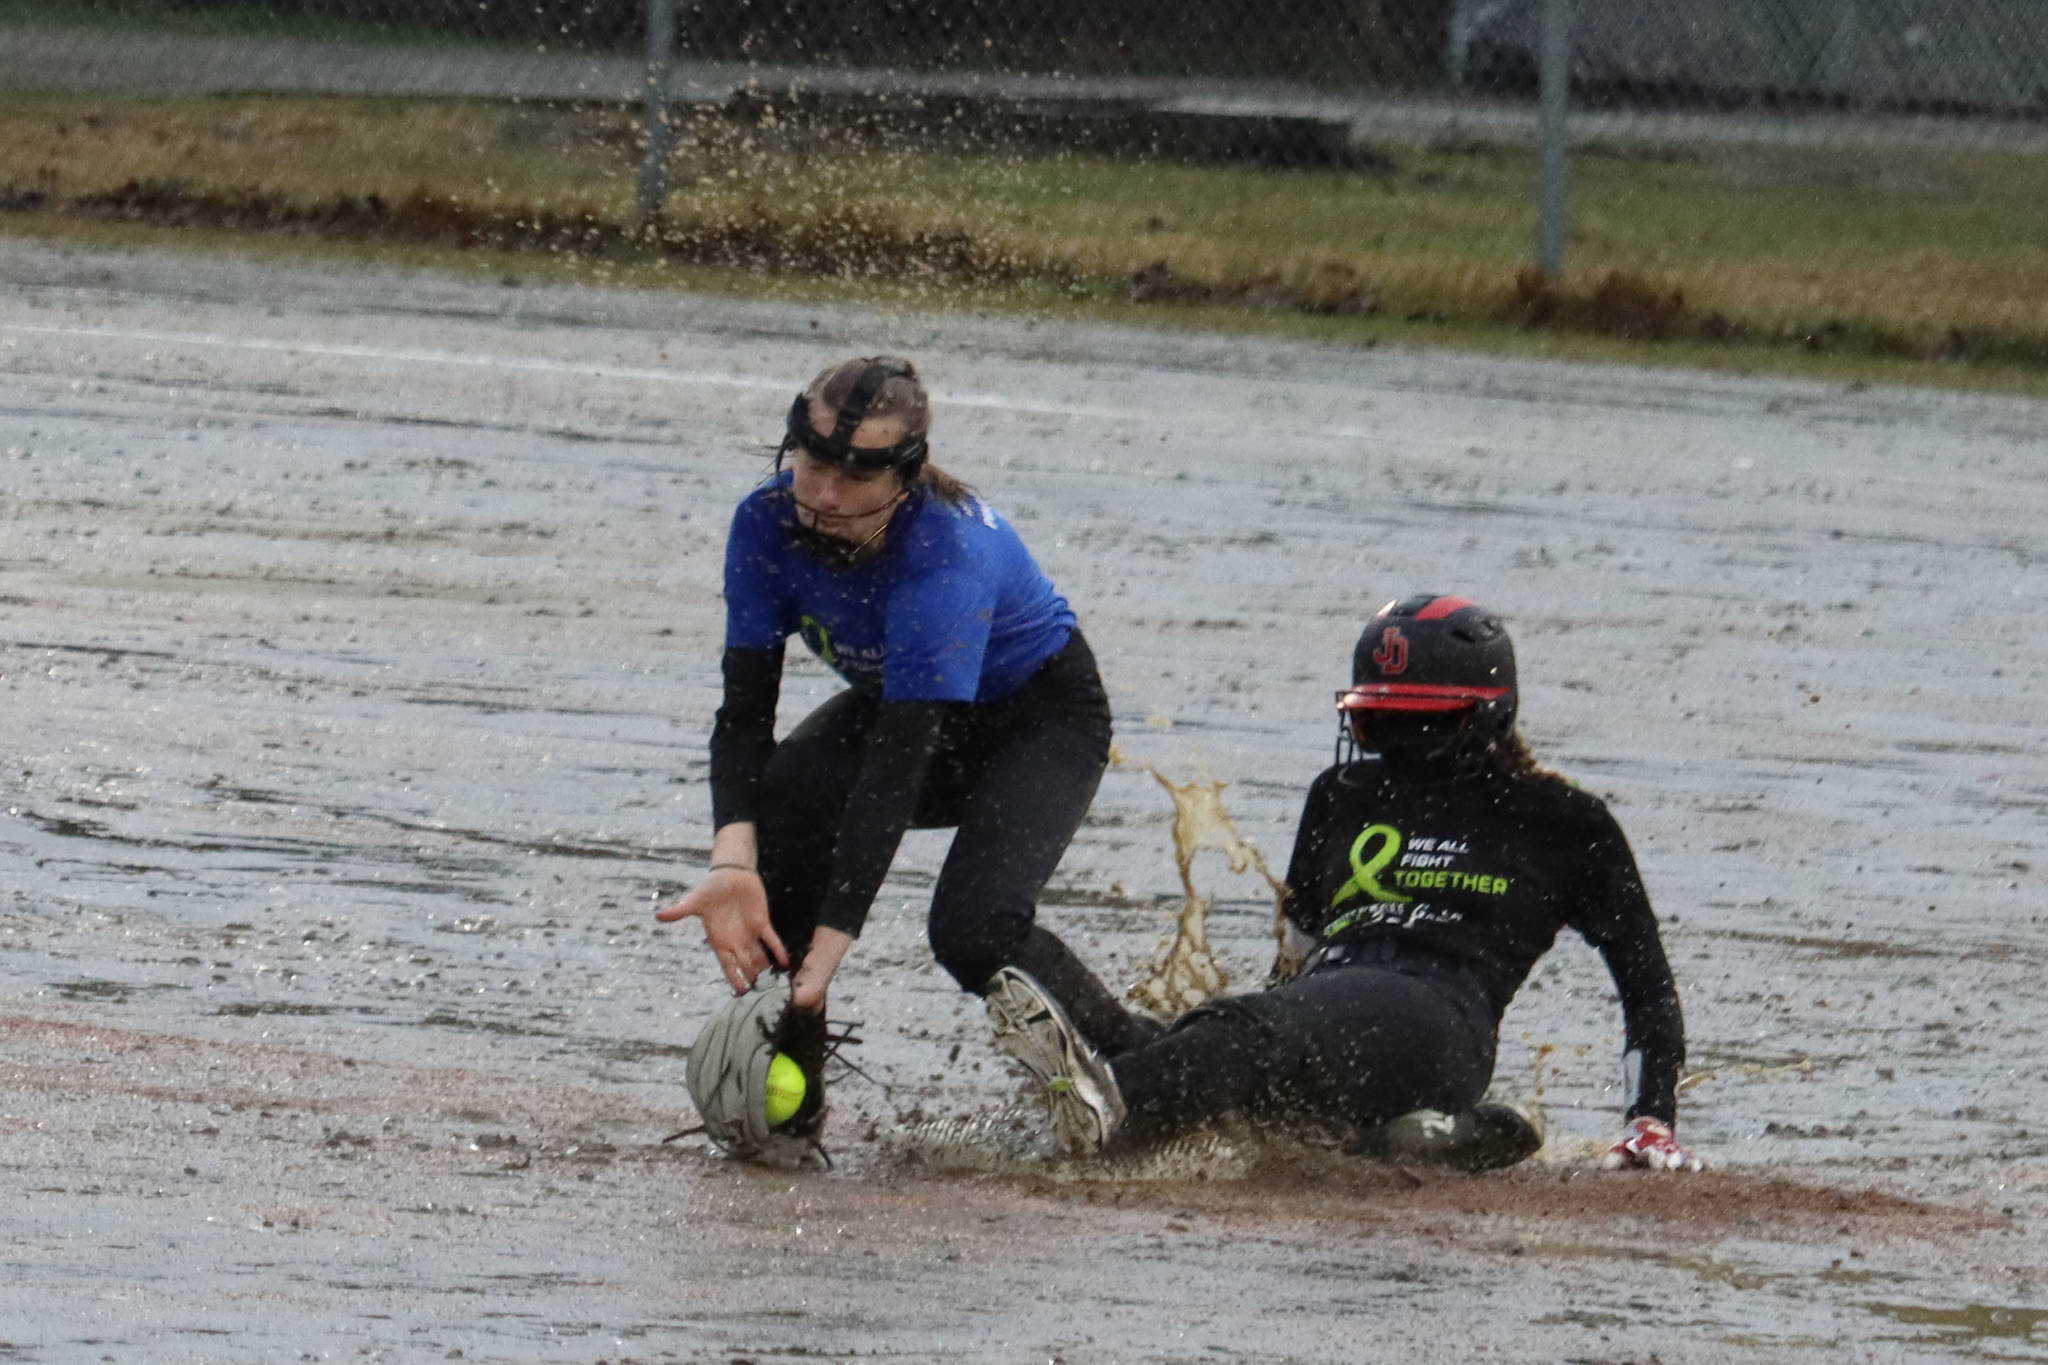 JDHS’ Gloria Bixby slides safe into second base and under the tag of TMHS’ Jenna Dobson during the first inning of a drizzly Friday night game against Thunder Mountain High School. JDHS leaped out to a 7-0 lead in the first inning and wound up winning 15-0. (Ben Hohenstatt / Juneau Empire)